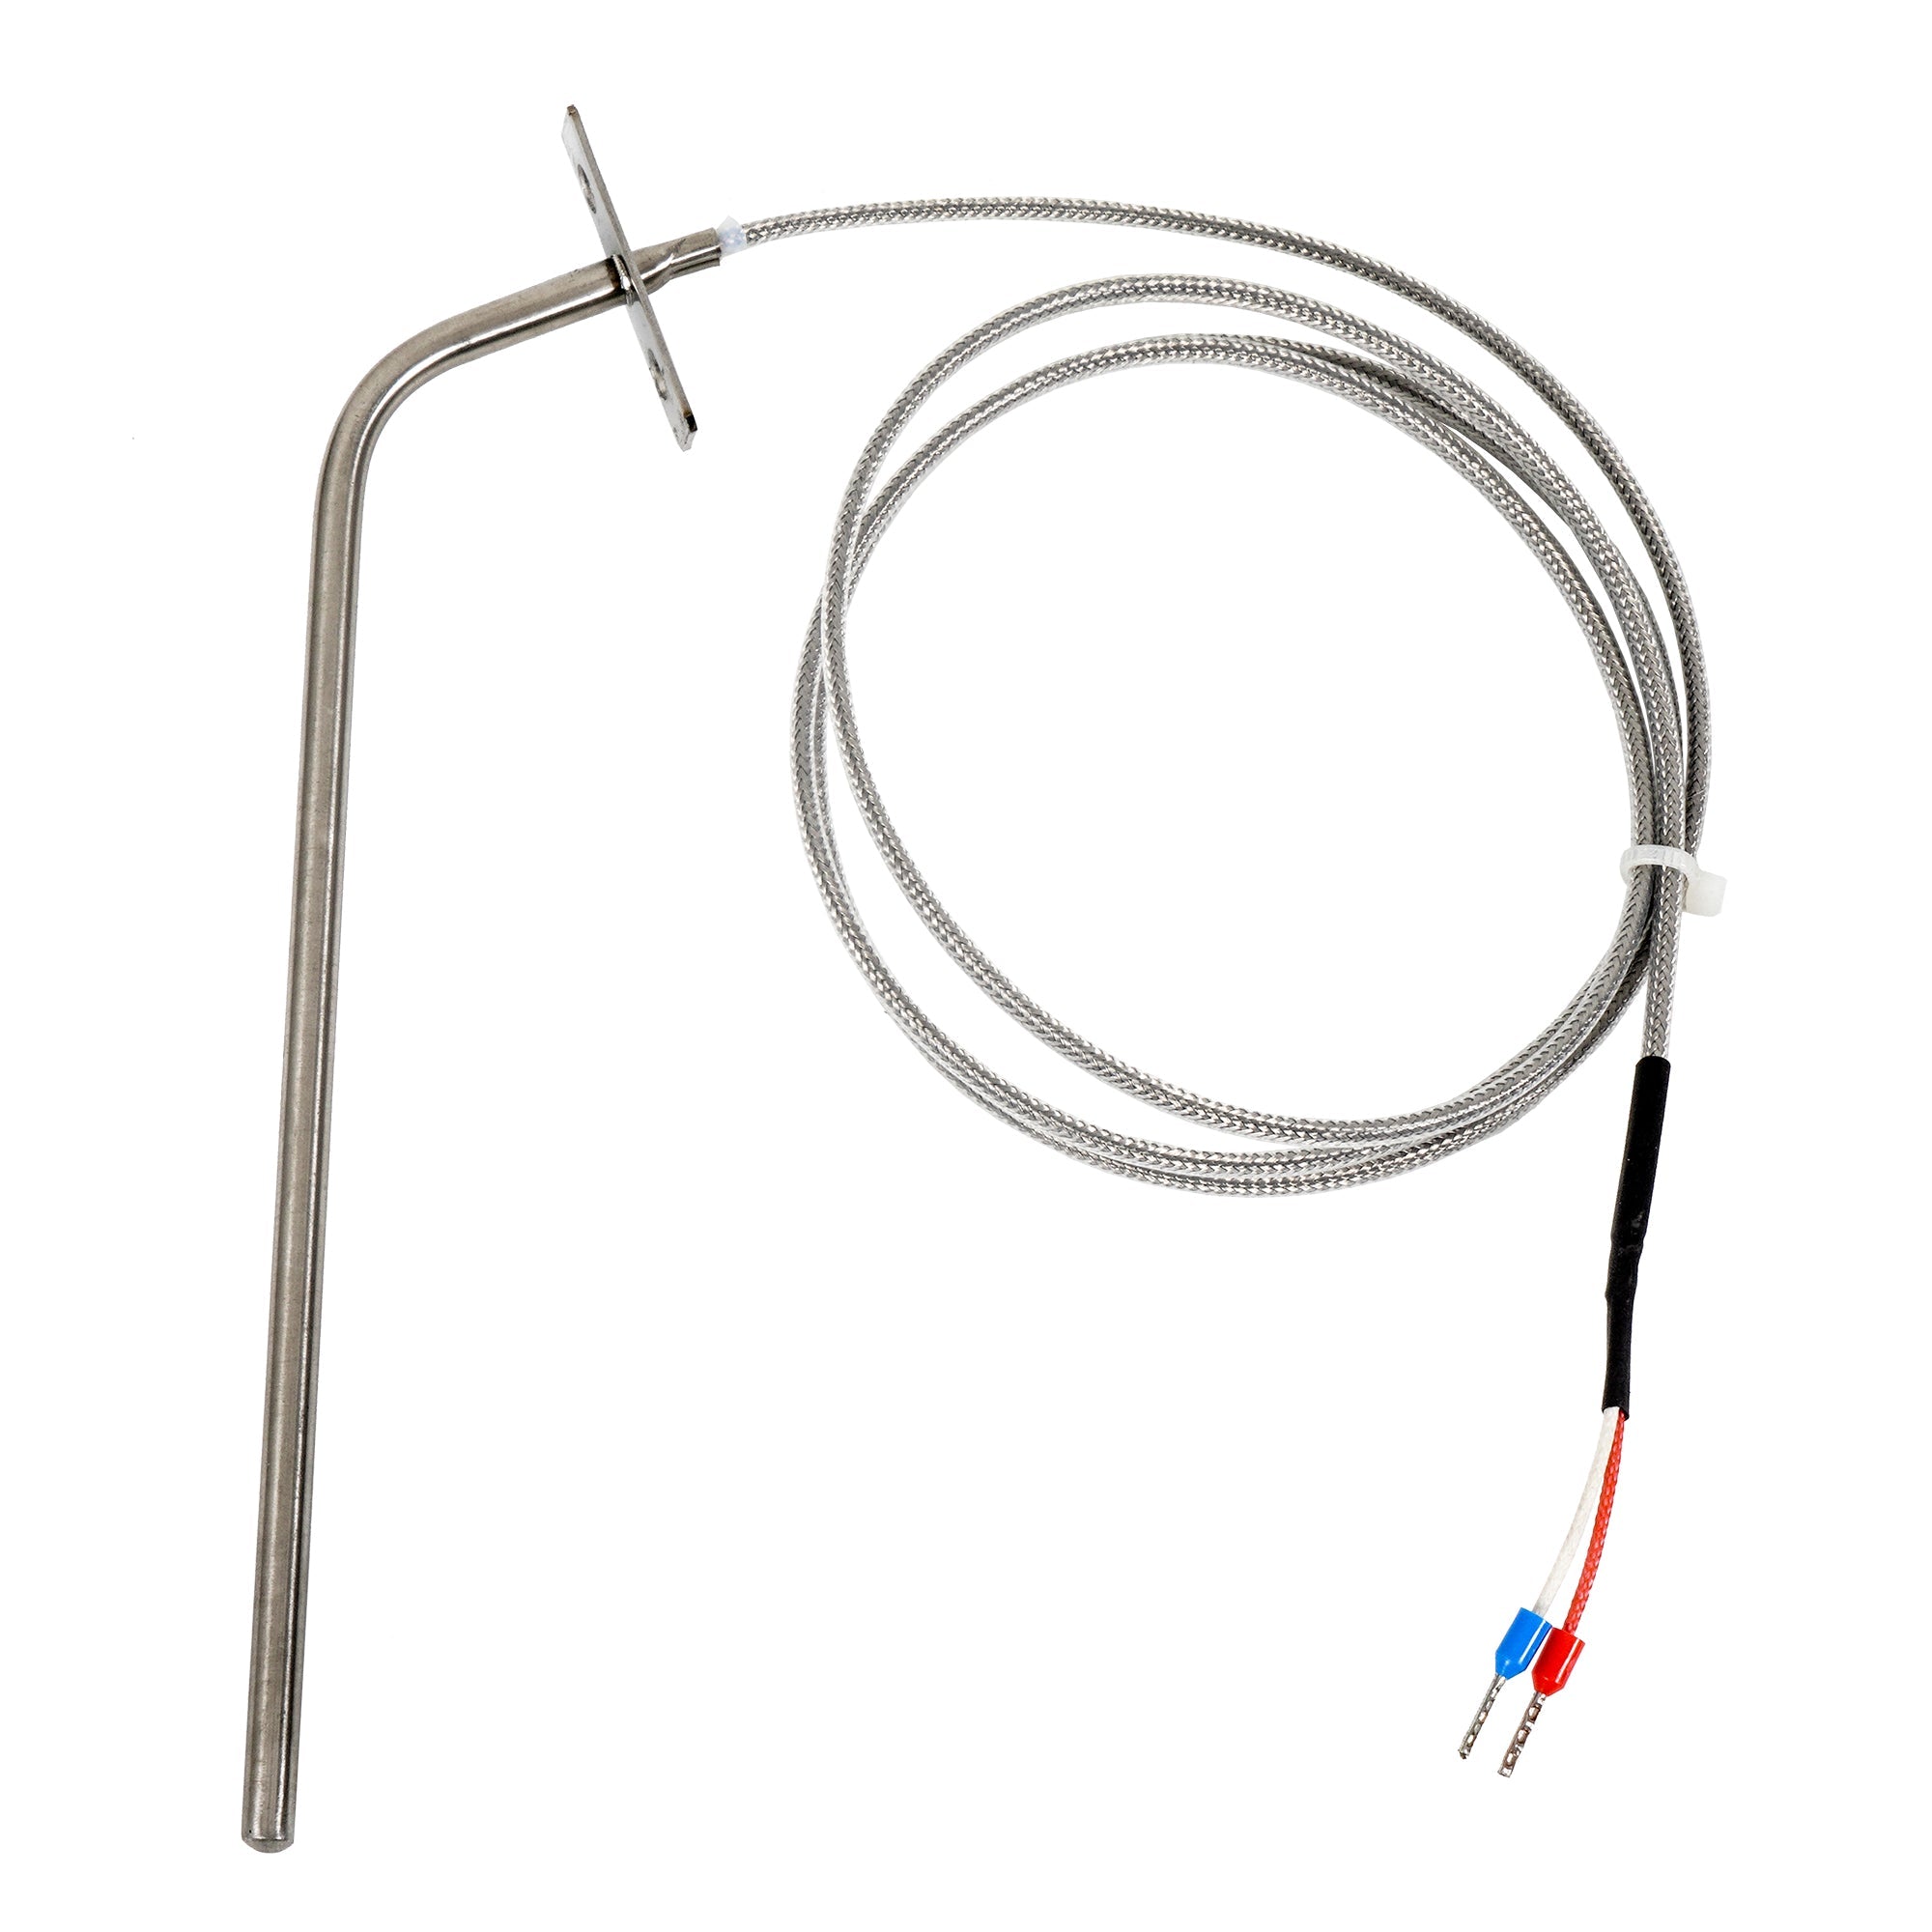 Pellet Smoker and Grill Temperature Probe – Even Embers